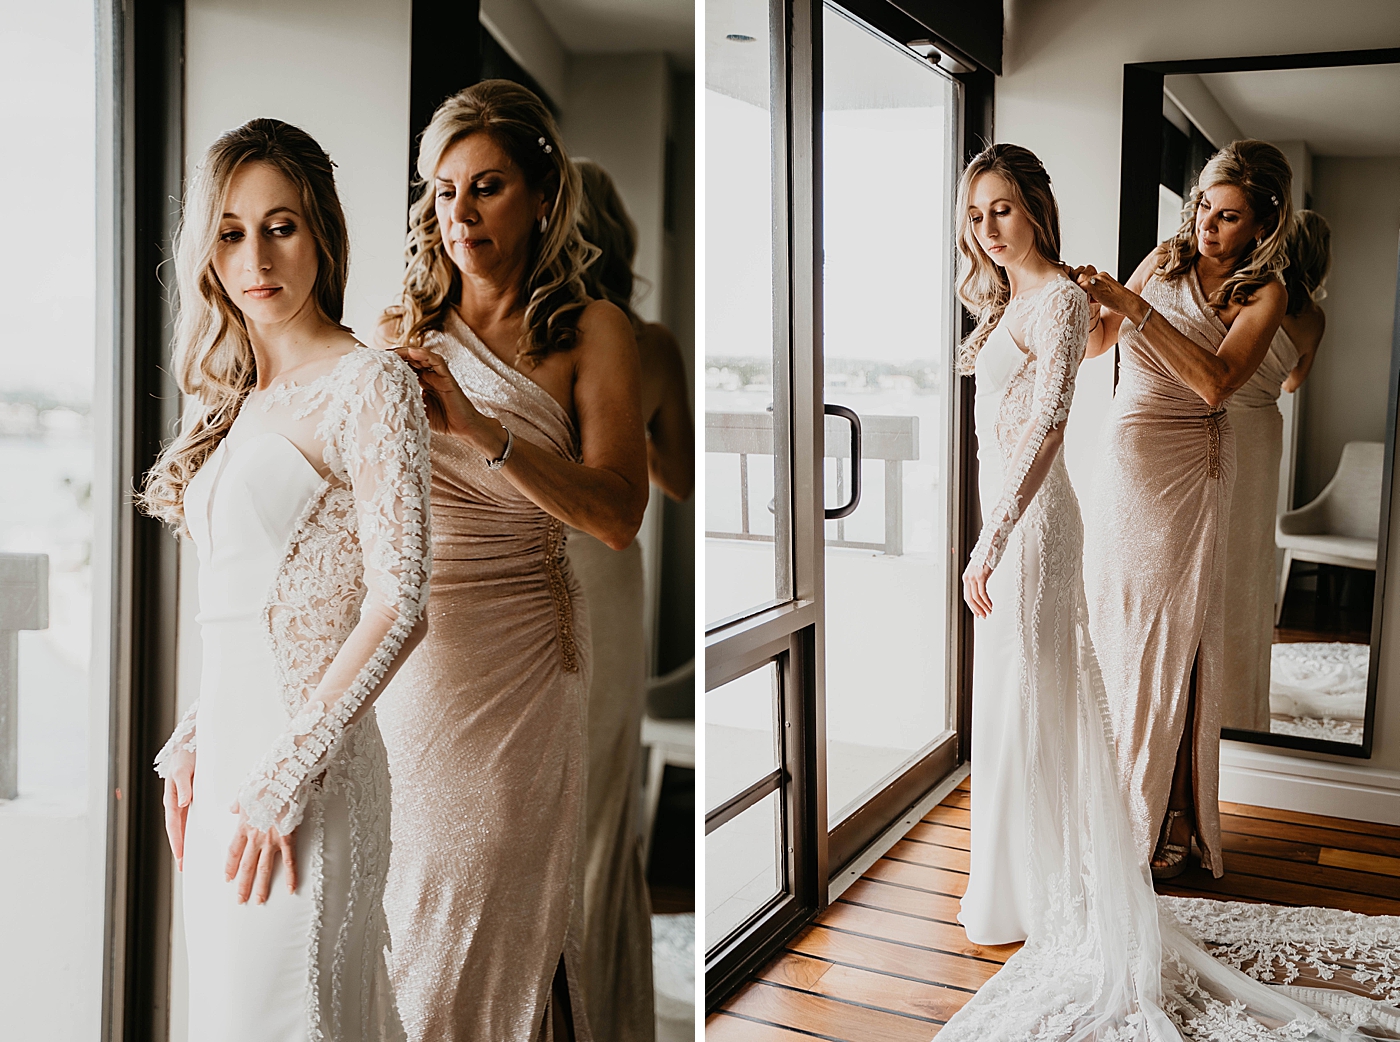 Bride getting ready finishing touches of dress Waterstone Resort and Marina Wedding captured by South Florida Wedding Photographer Krystal Capone Photography